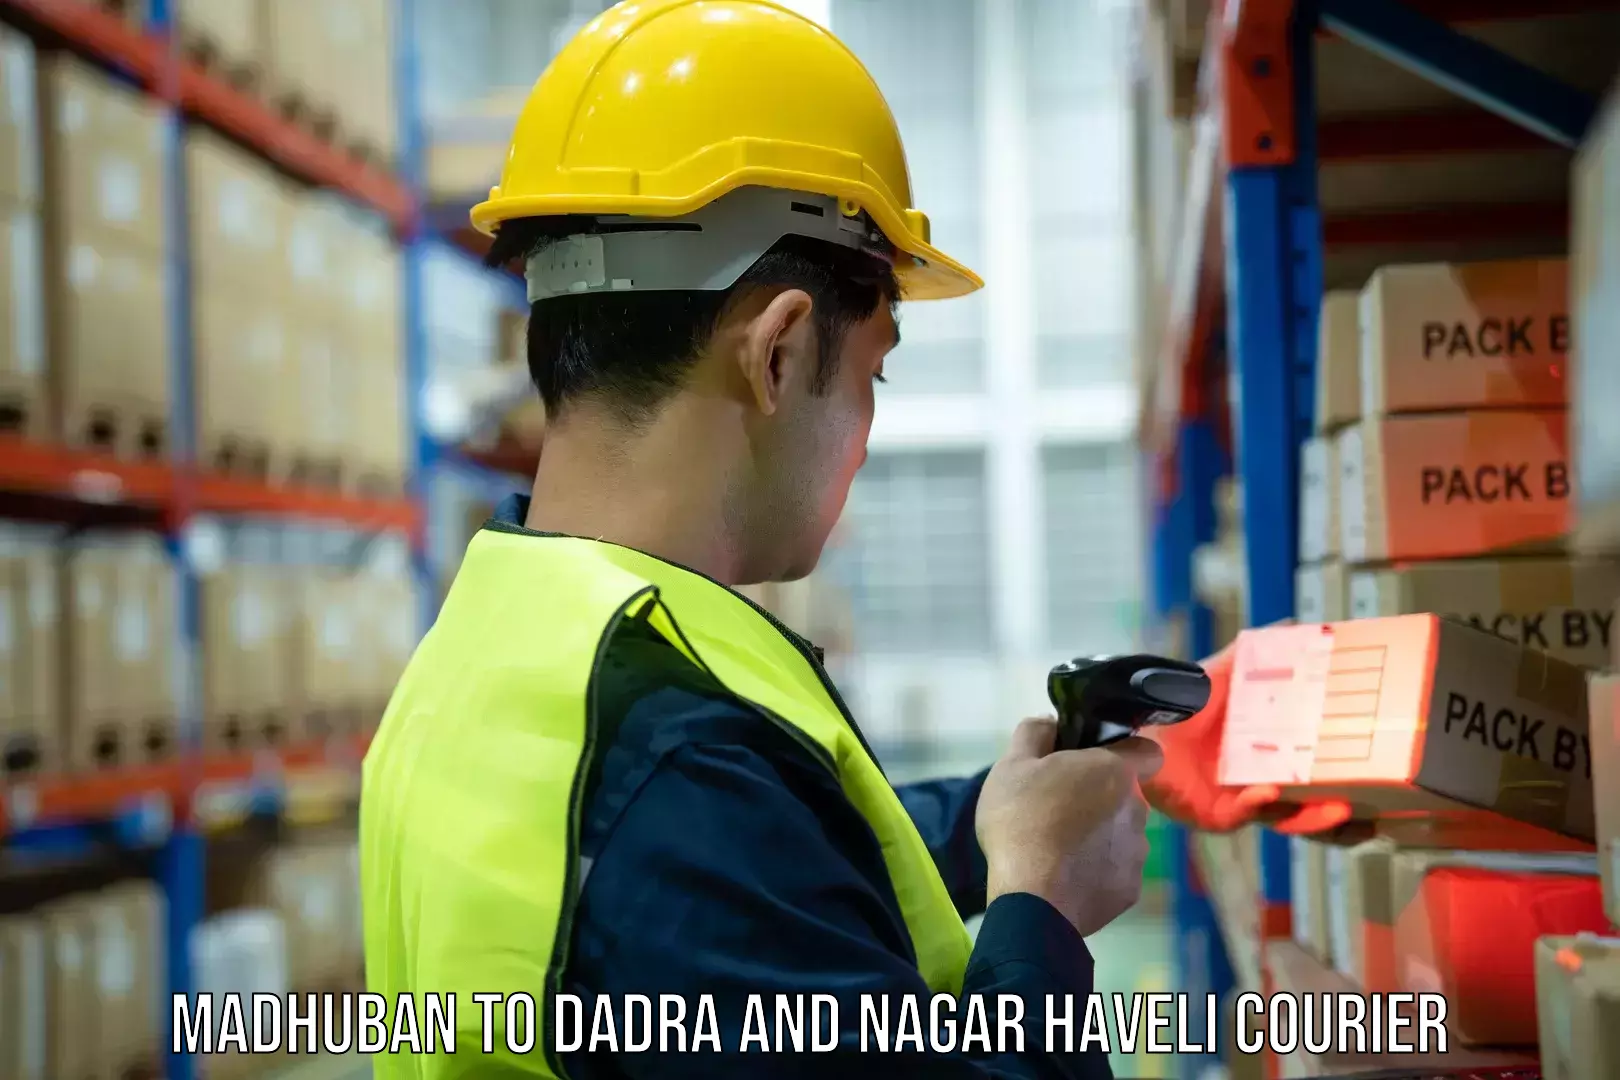 User-friendly delivery service Madhuban to Dadra and Nagar Haveli